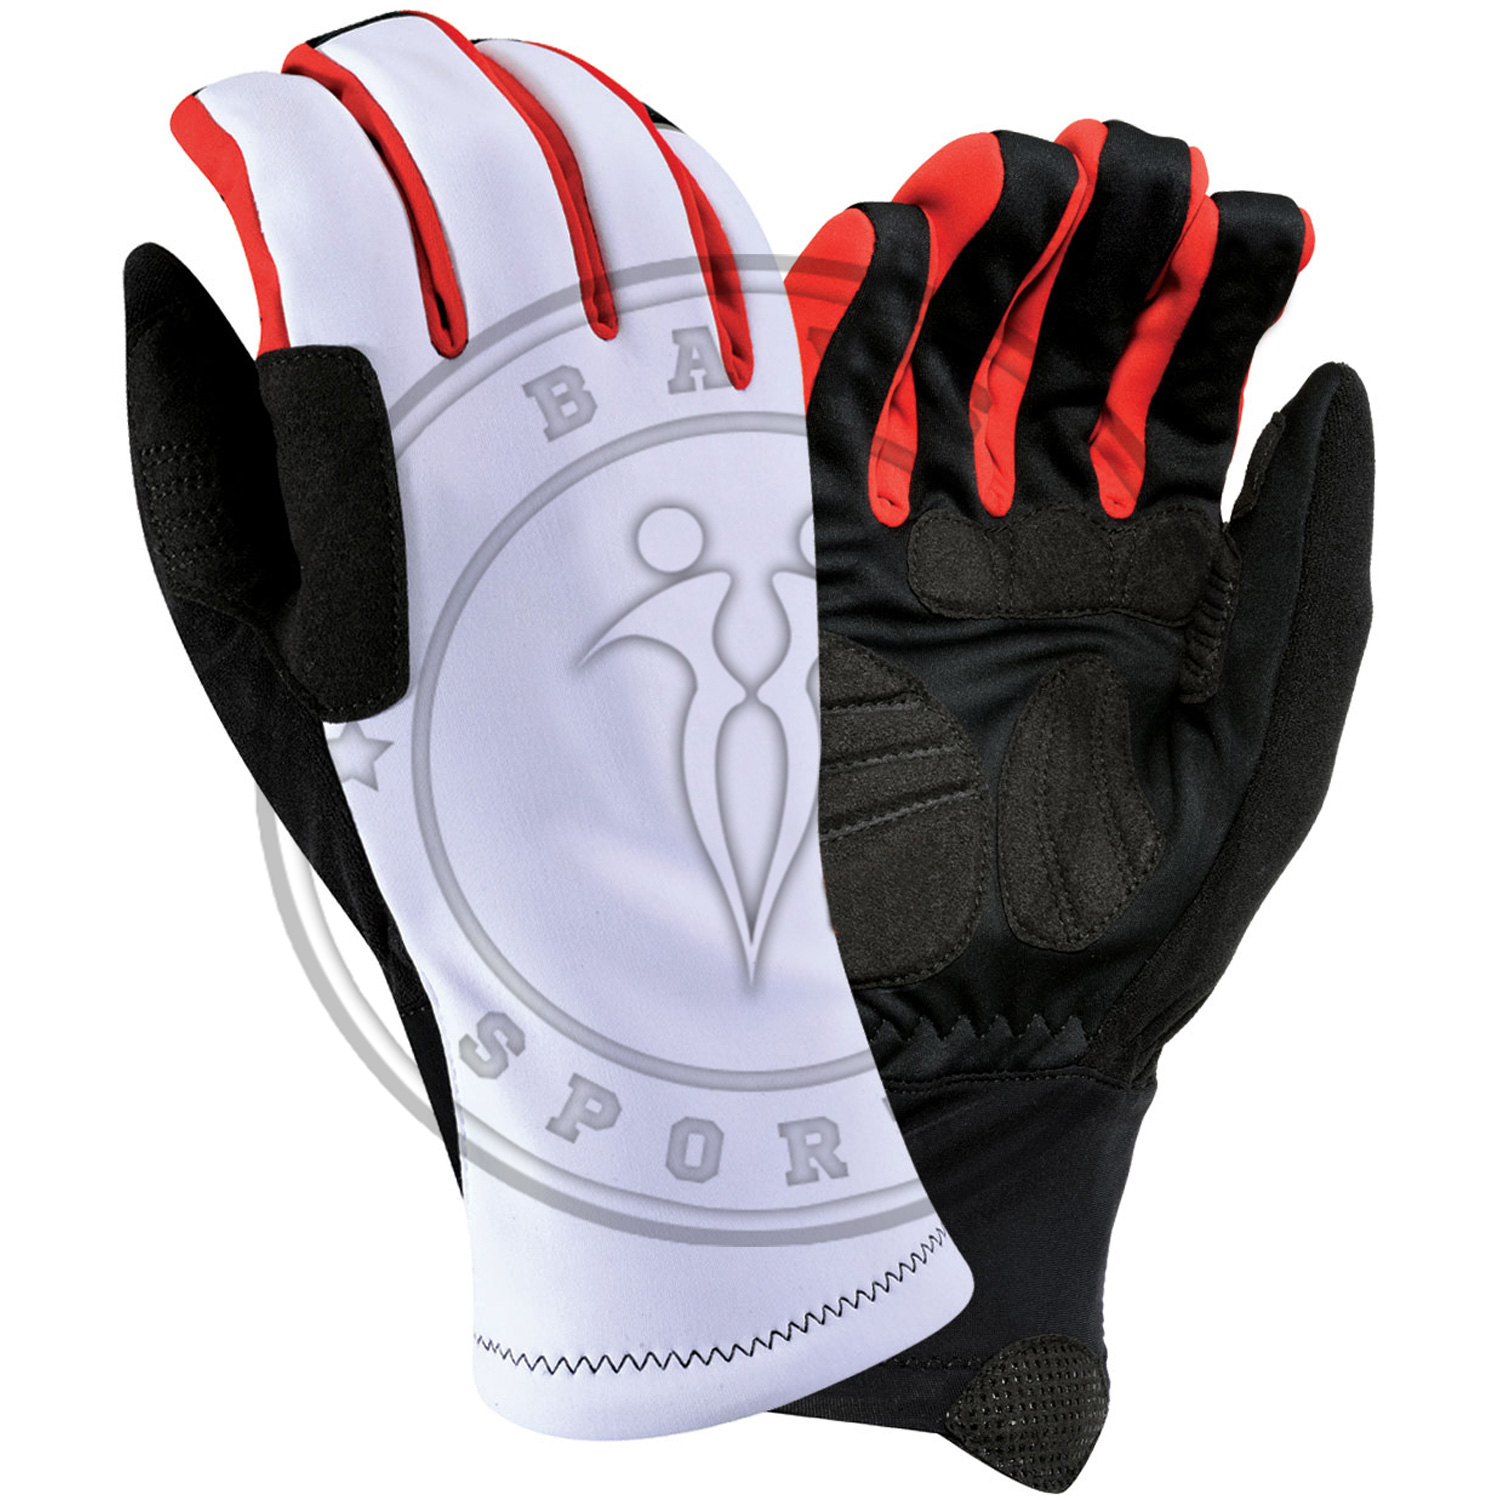 Cycling Weather Glove